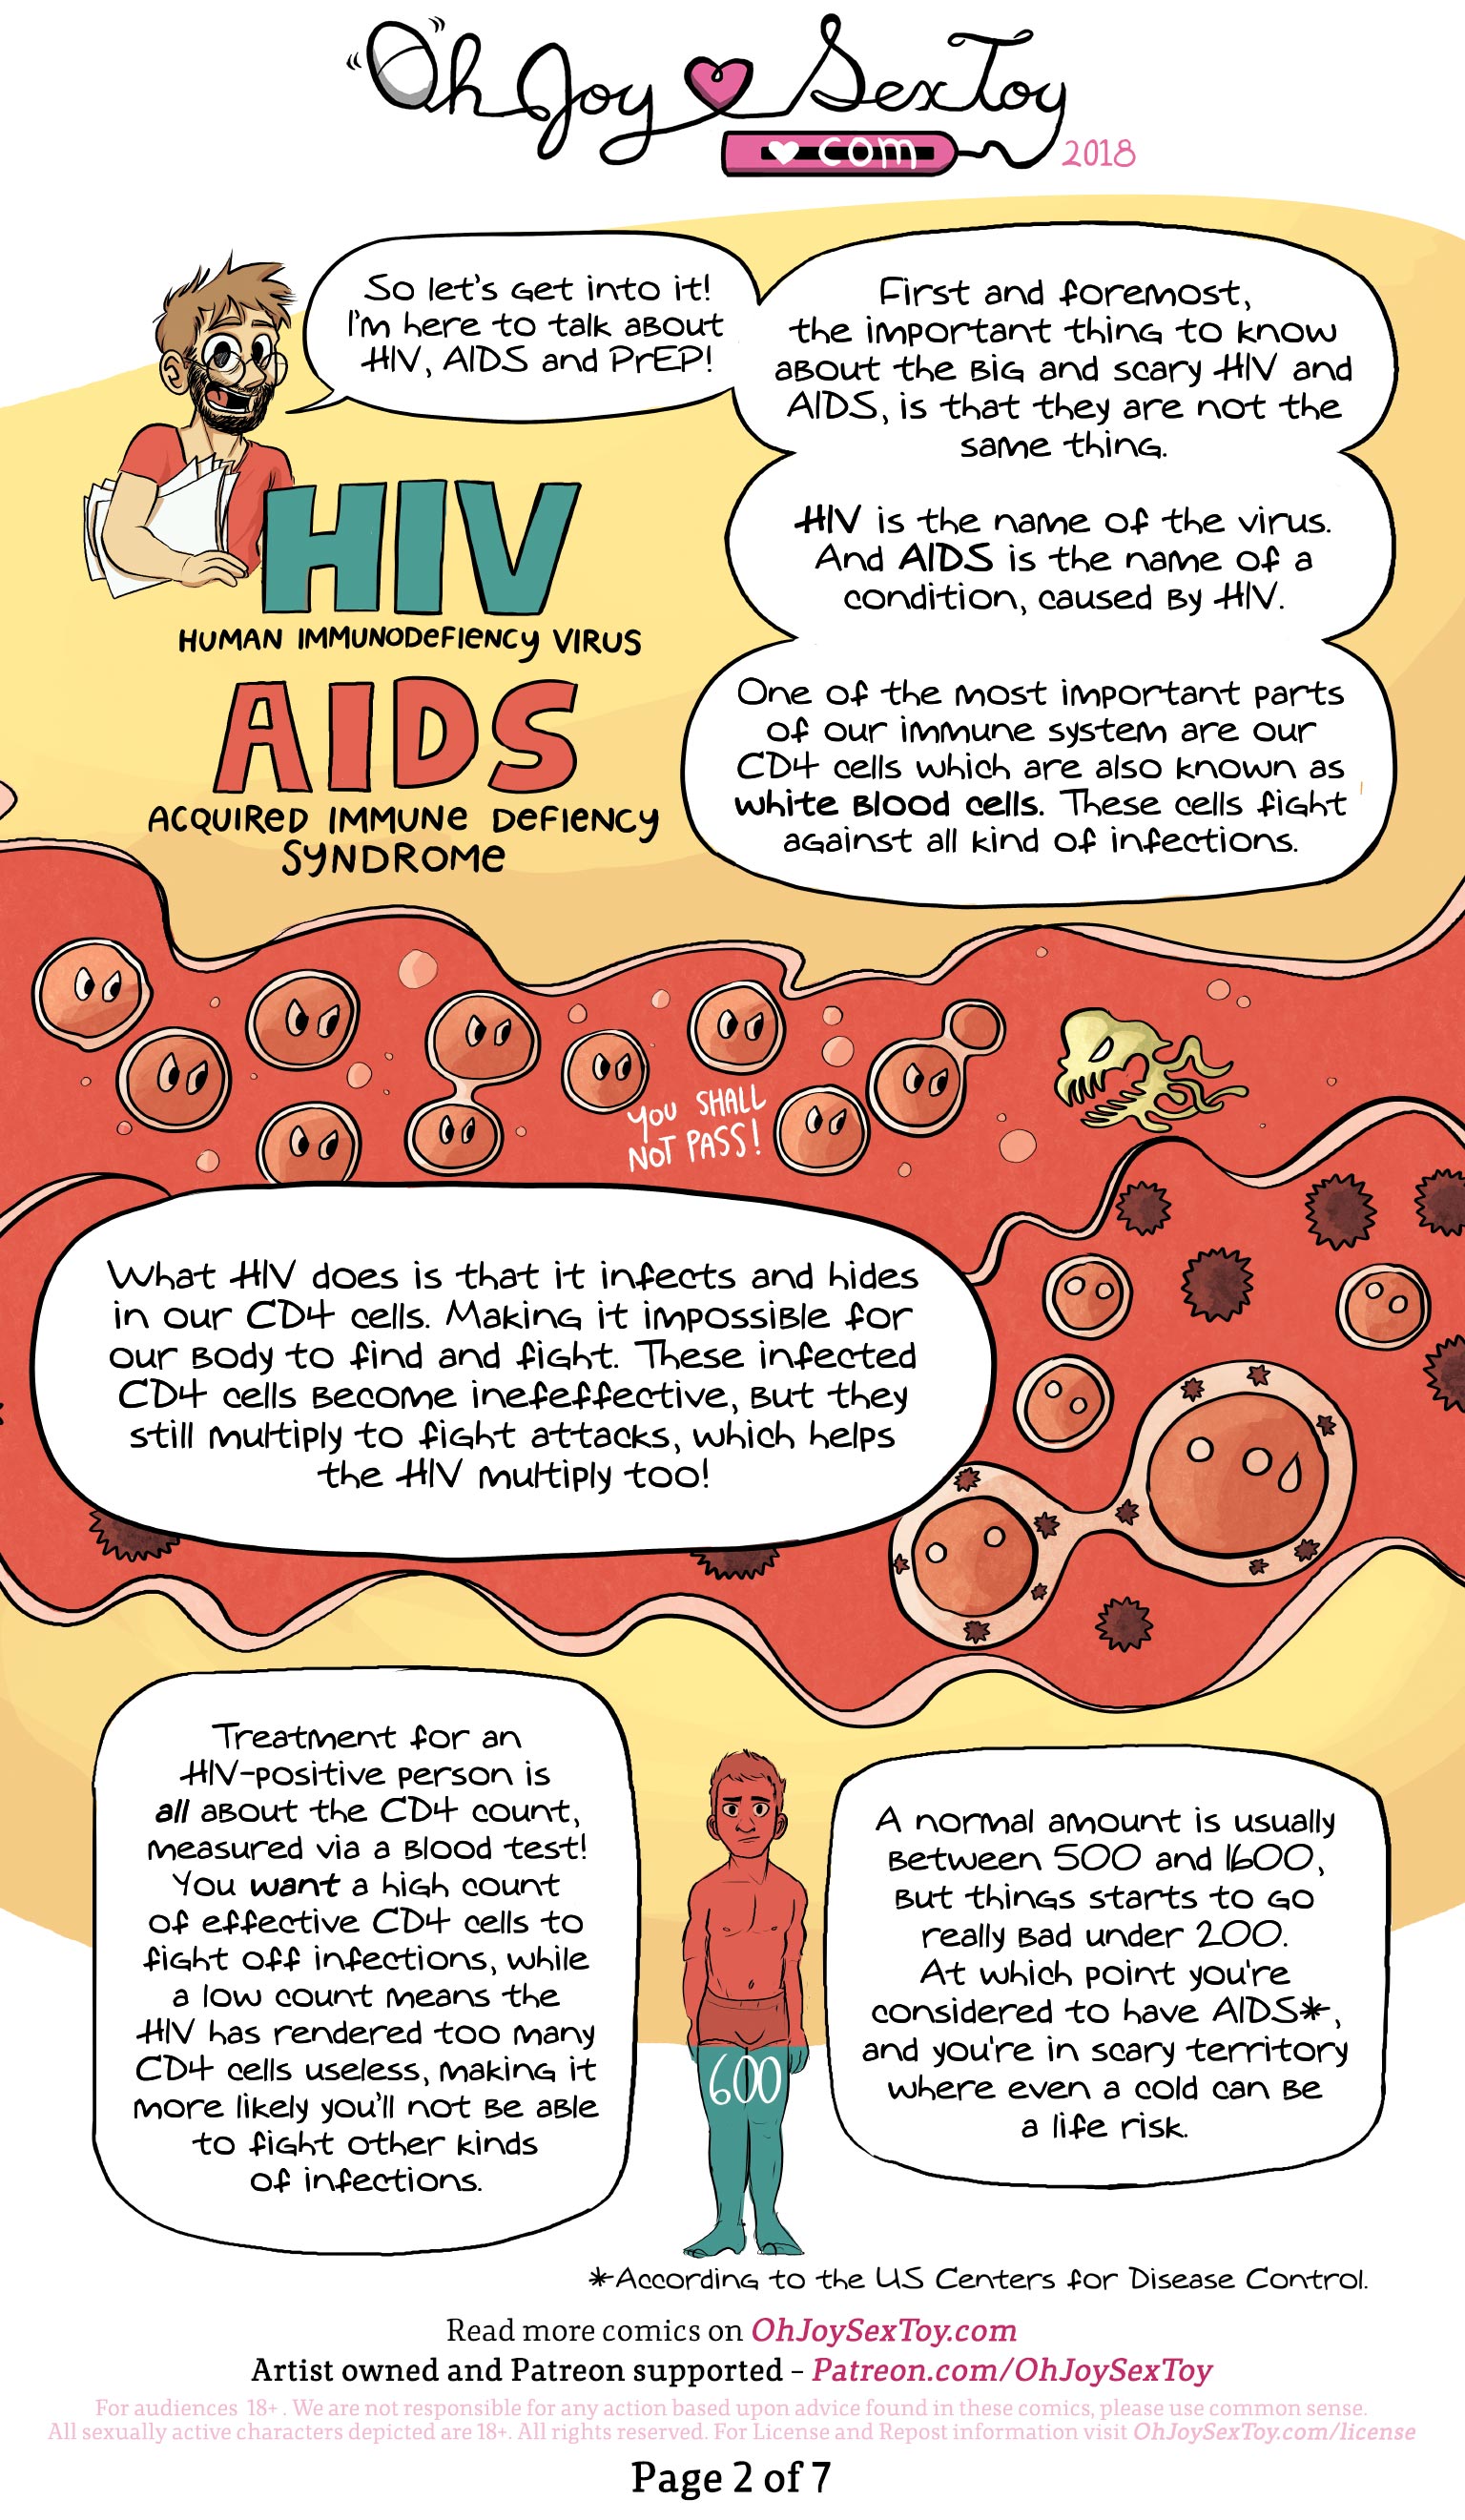 AIDS, HIV and PrEP by Silver